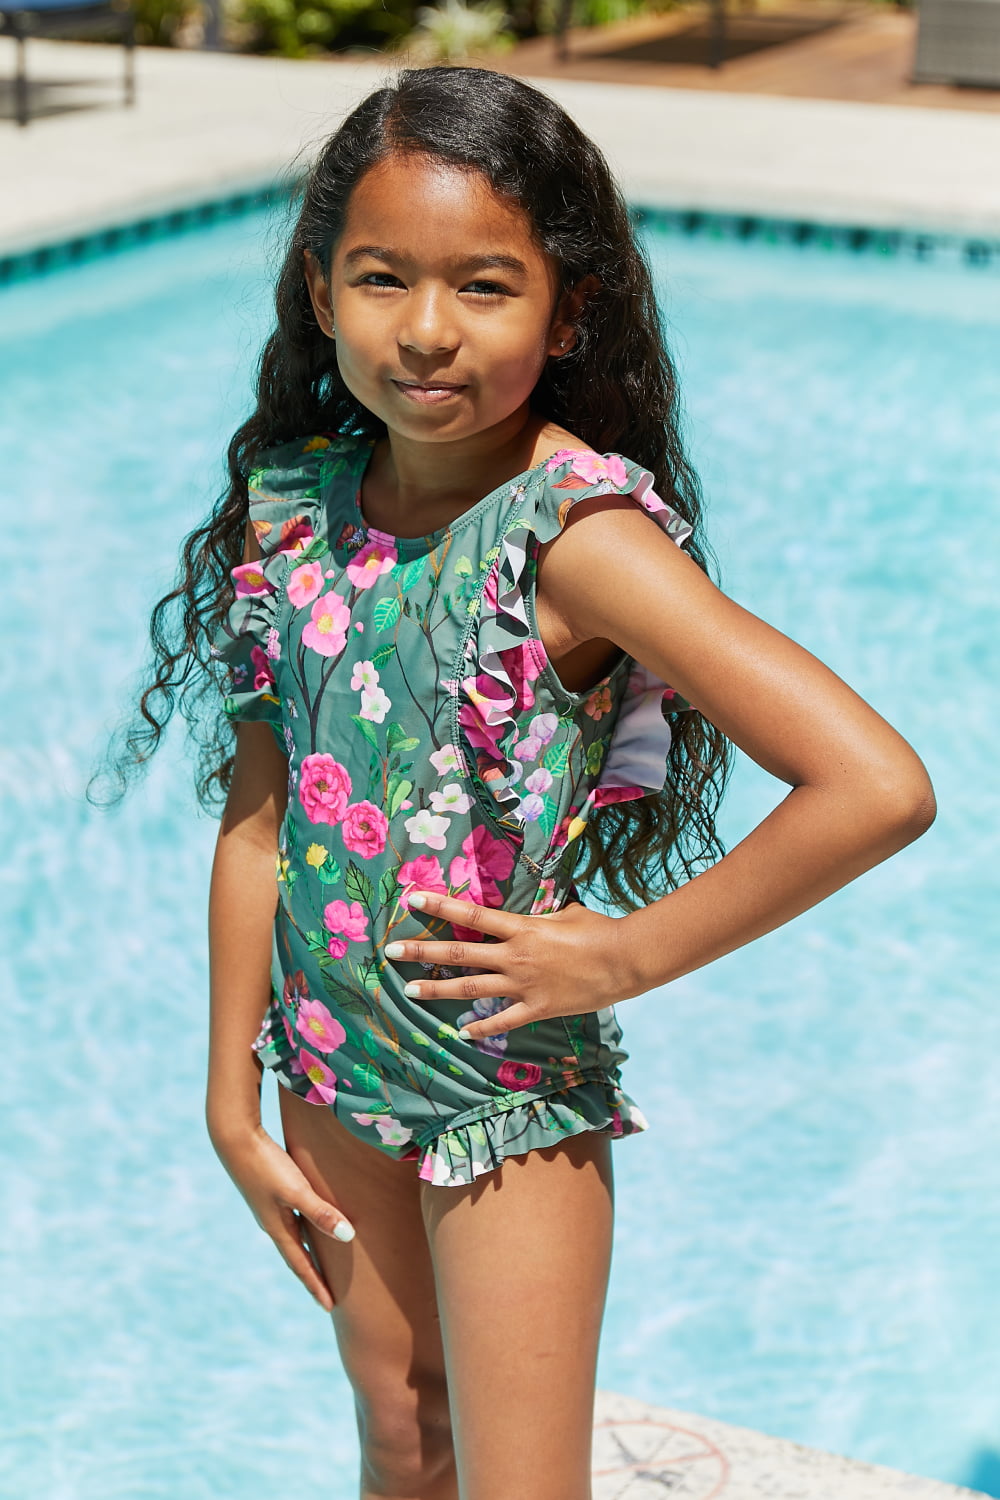 Bring Me Flowers V-Neck One Piece Swimsuit*little girls*-SHIPS DIRECTLY TO YOU!